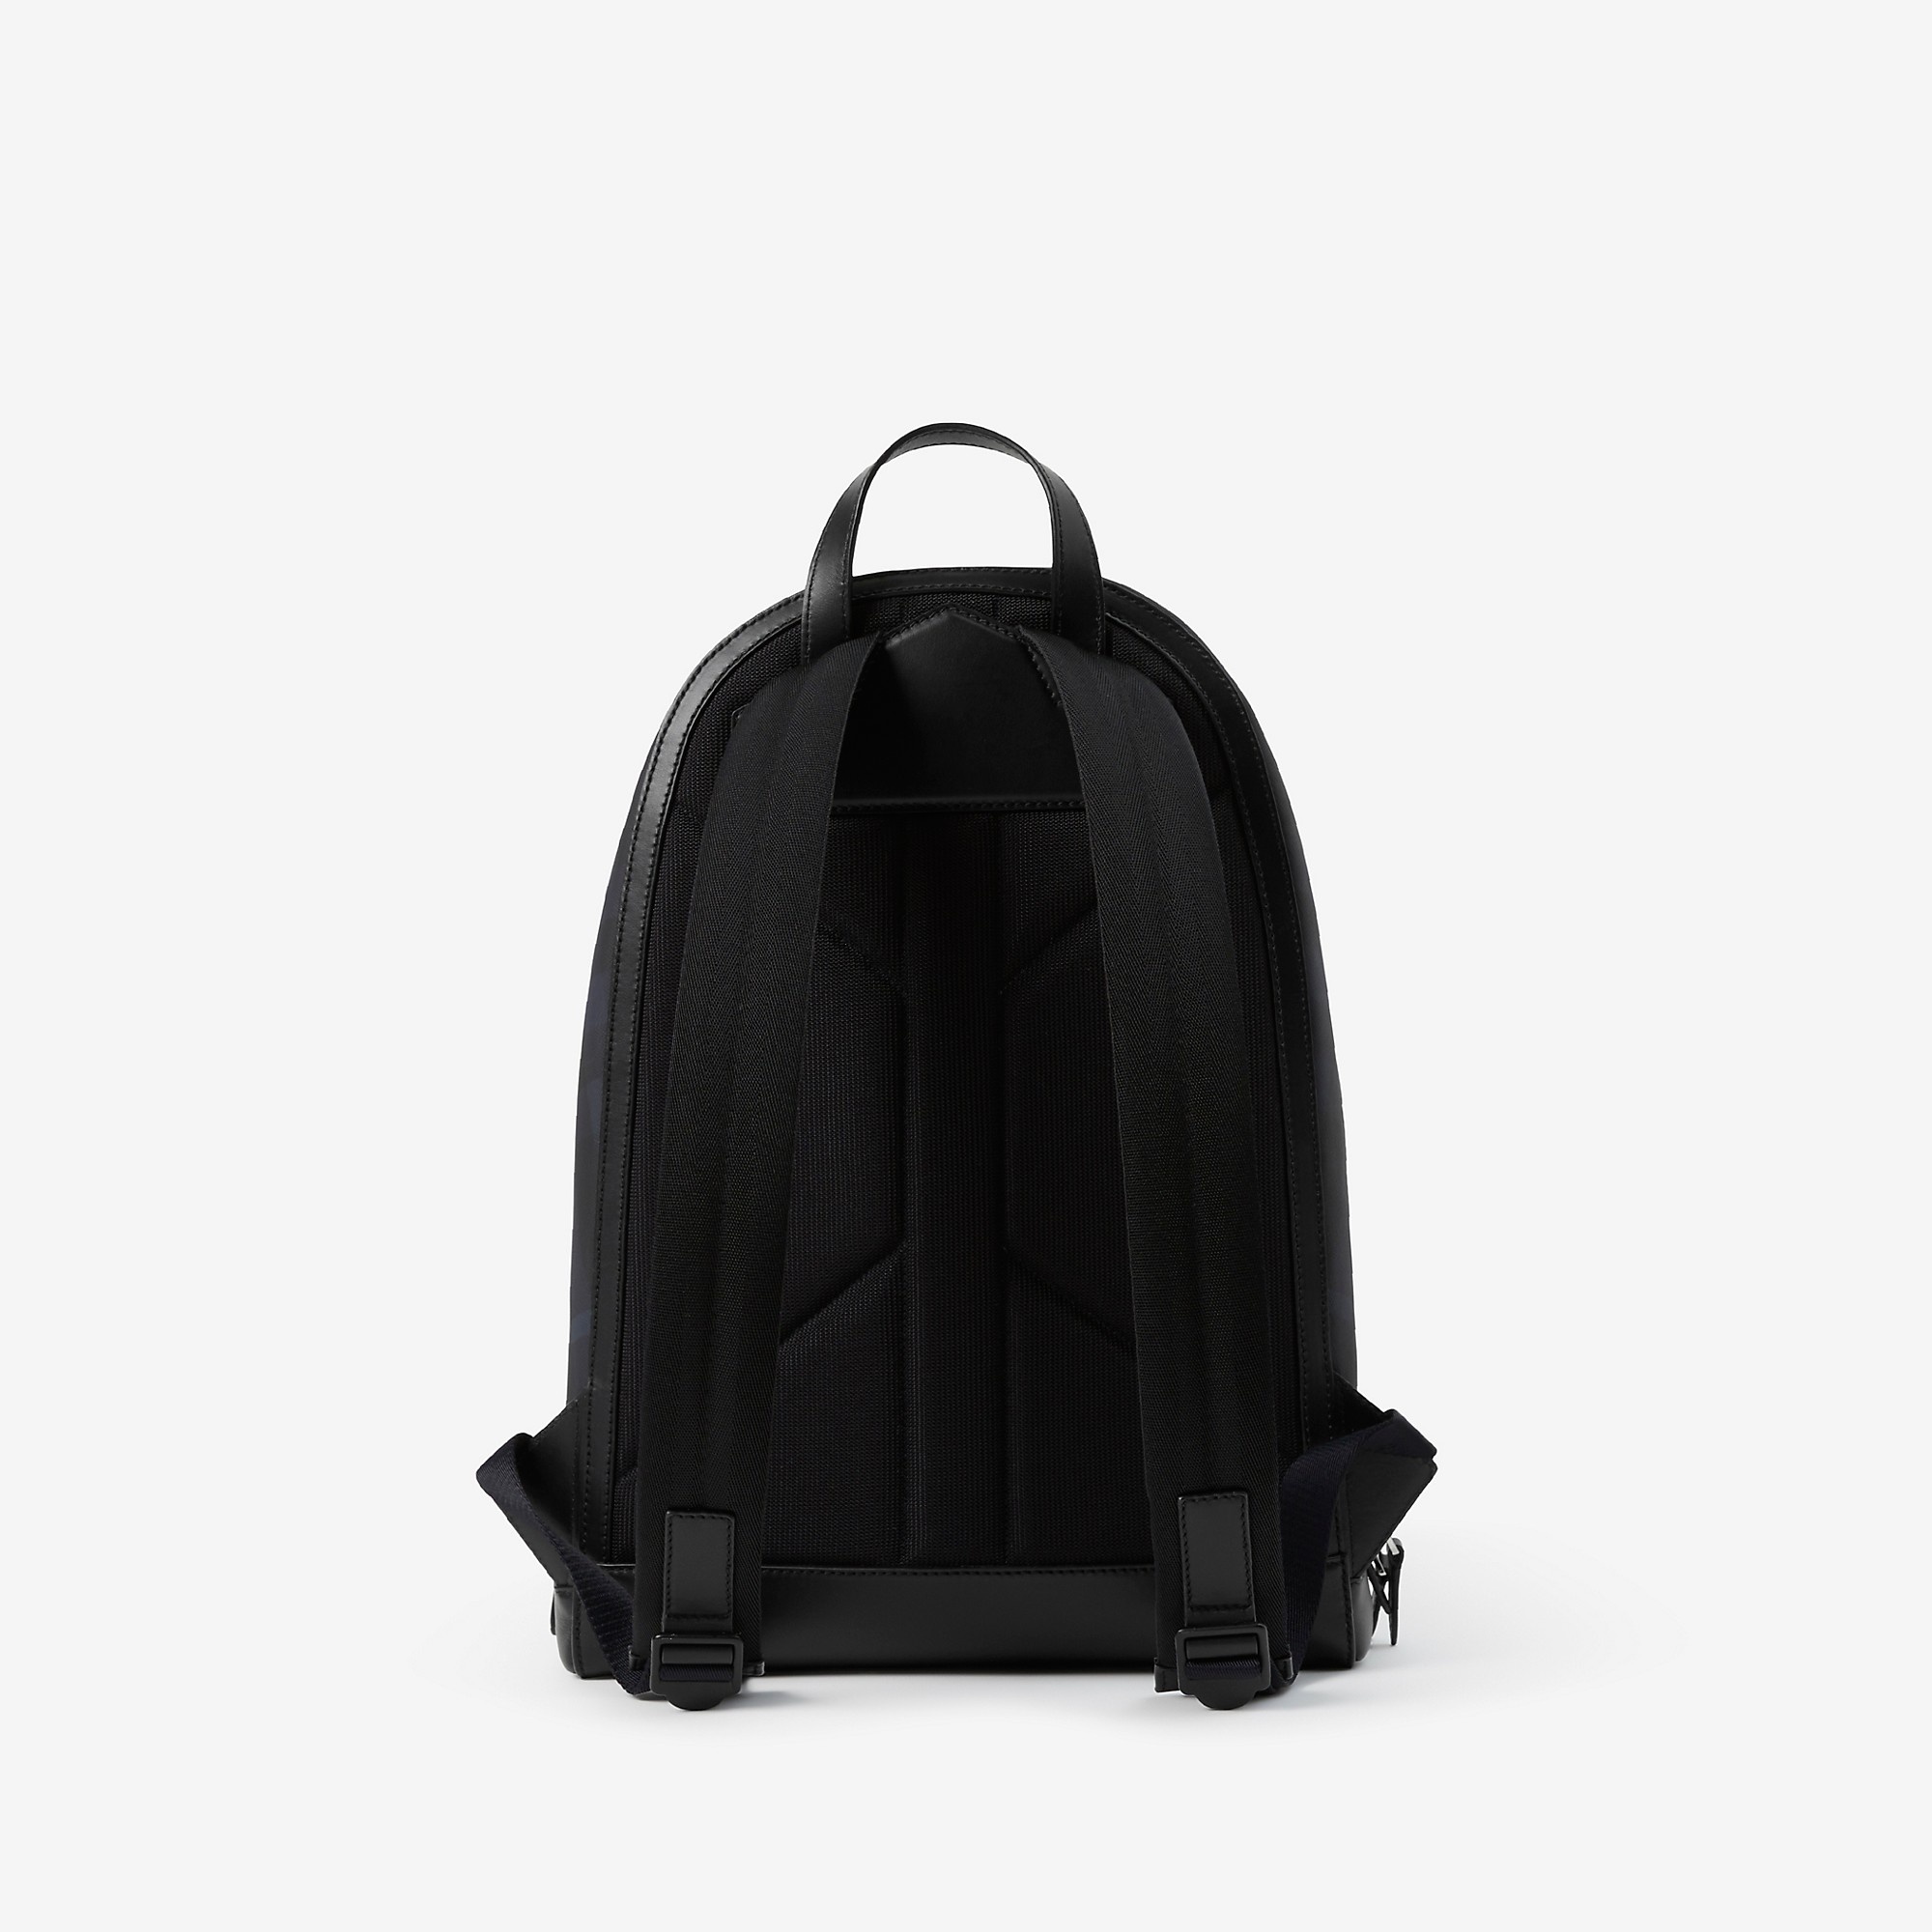 Rocco Backpack - 3